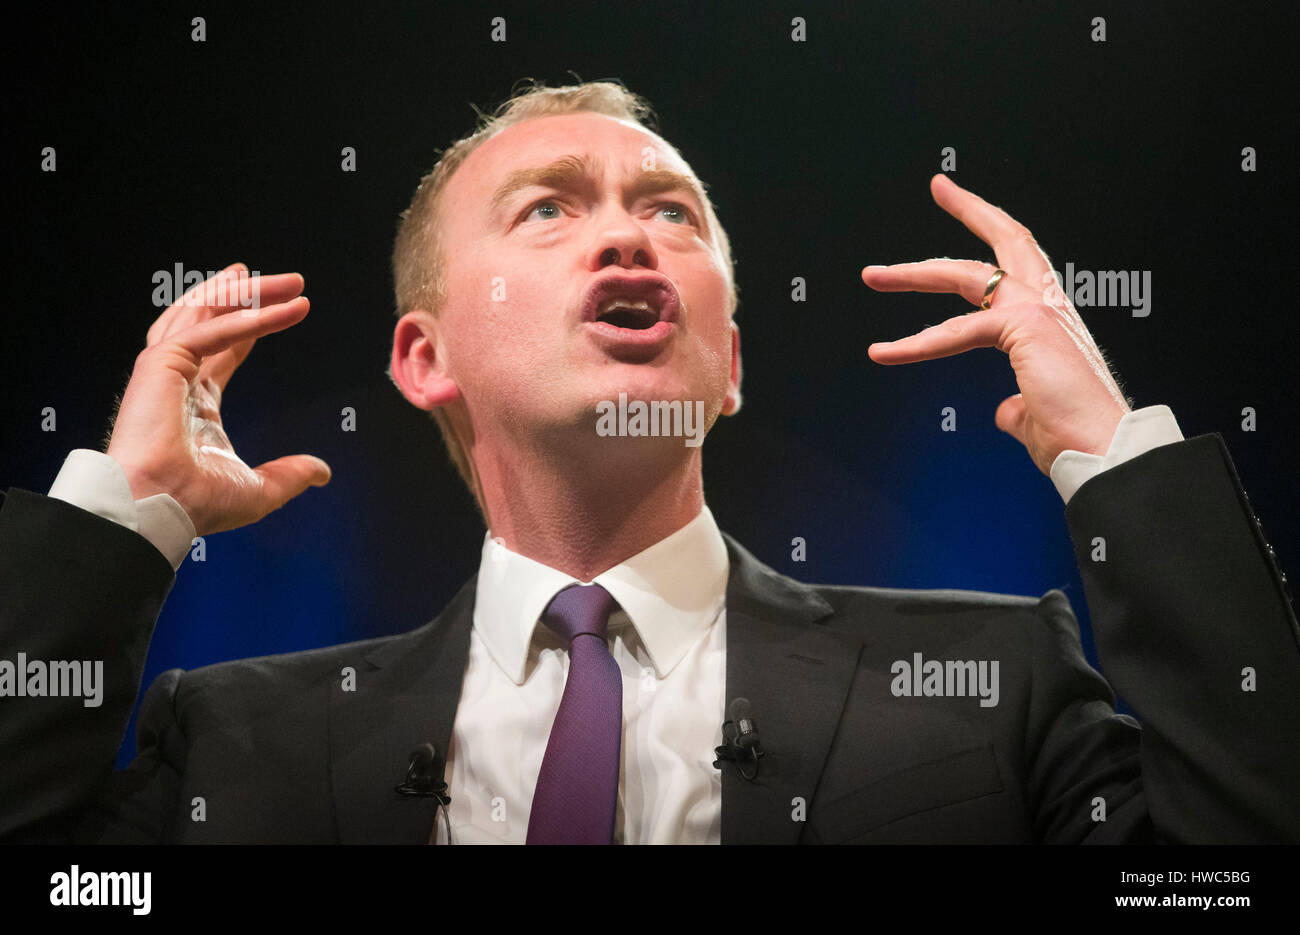 Leader of the Liberal Democrats Tim Farron during his keynote speech where he accused Theresa May of pursuing the same aggressive nationalistic agenda as Donald Trump and Vladimir Putin, during the Liberal Democrat spring conference at the Barbican Centre in York. Stock Photo